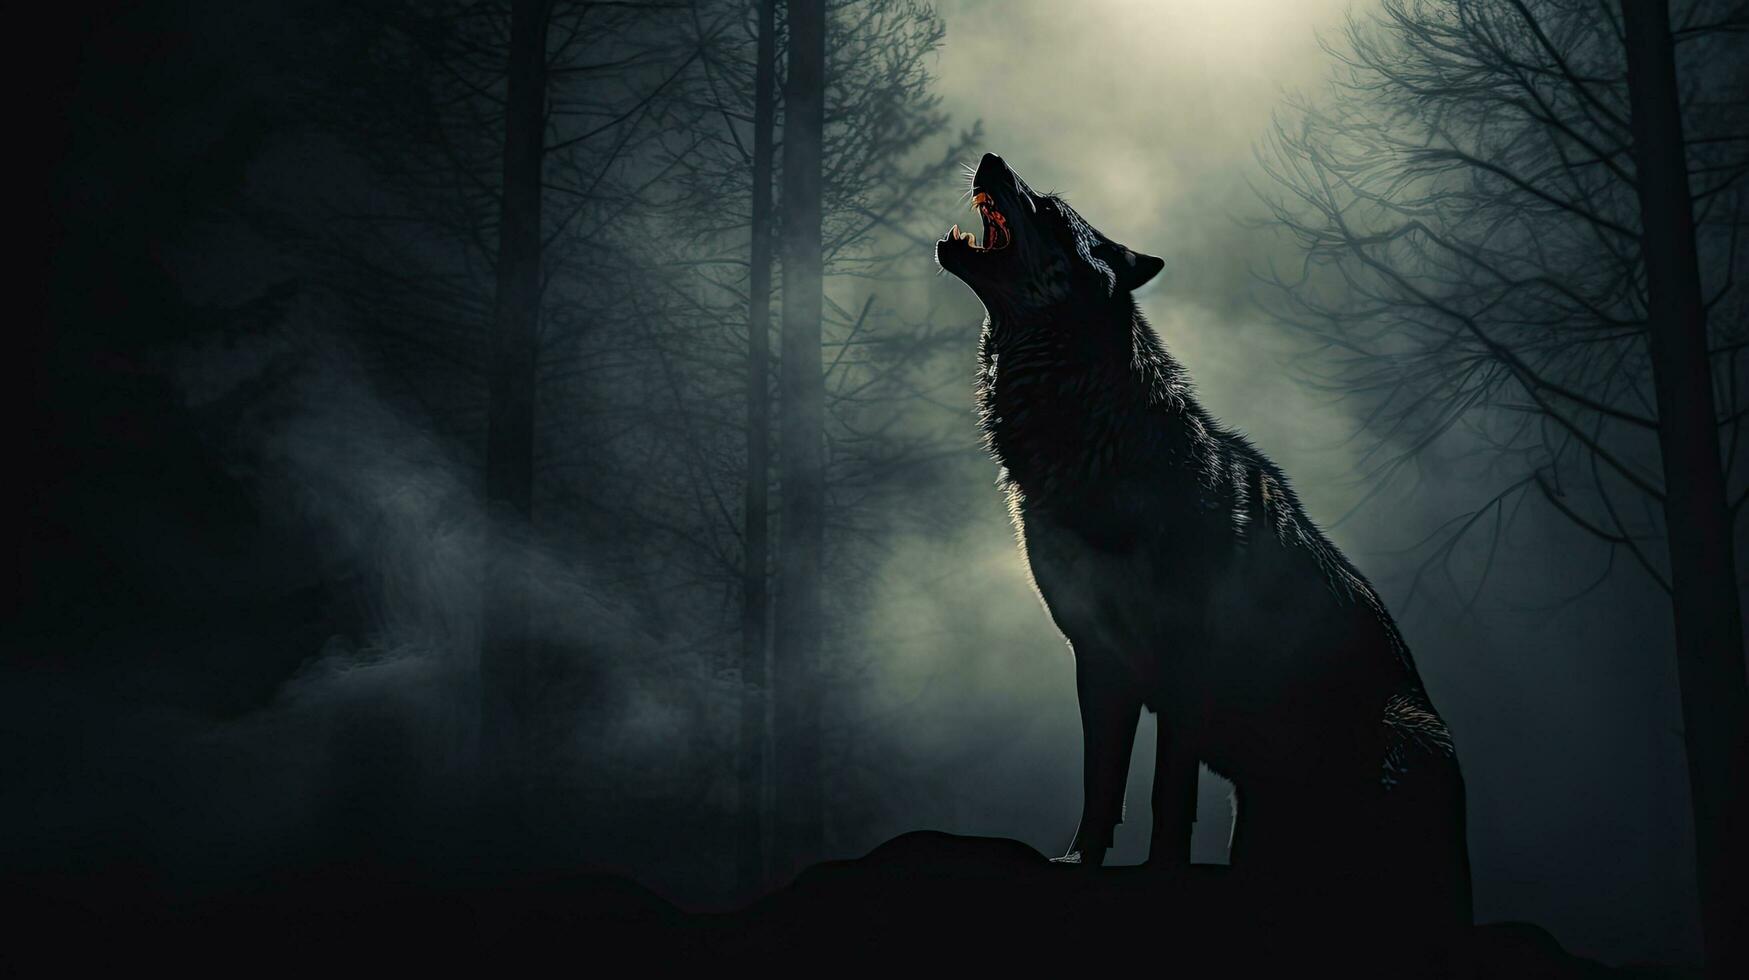 Halloween themed art of wolf silhouette against foggy background photo